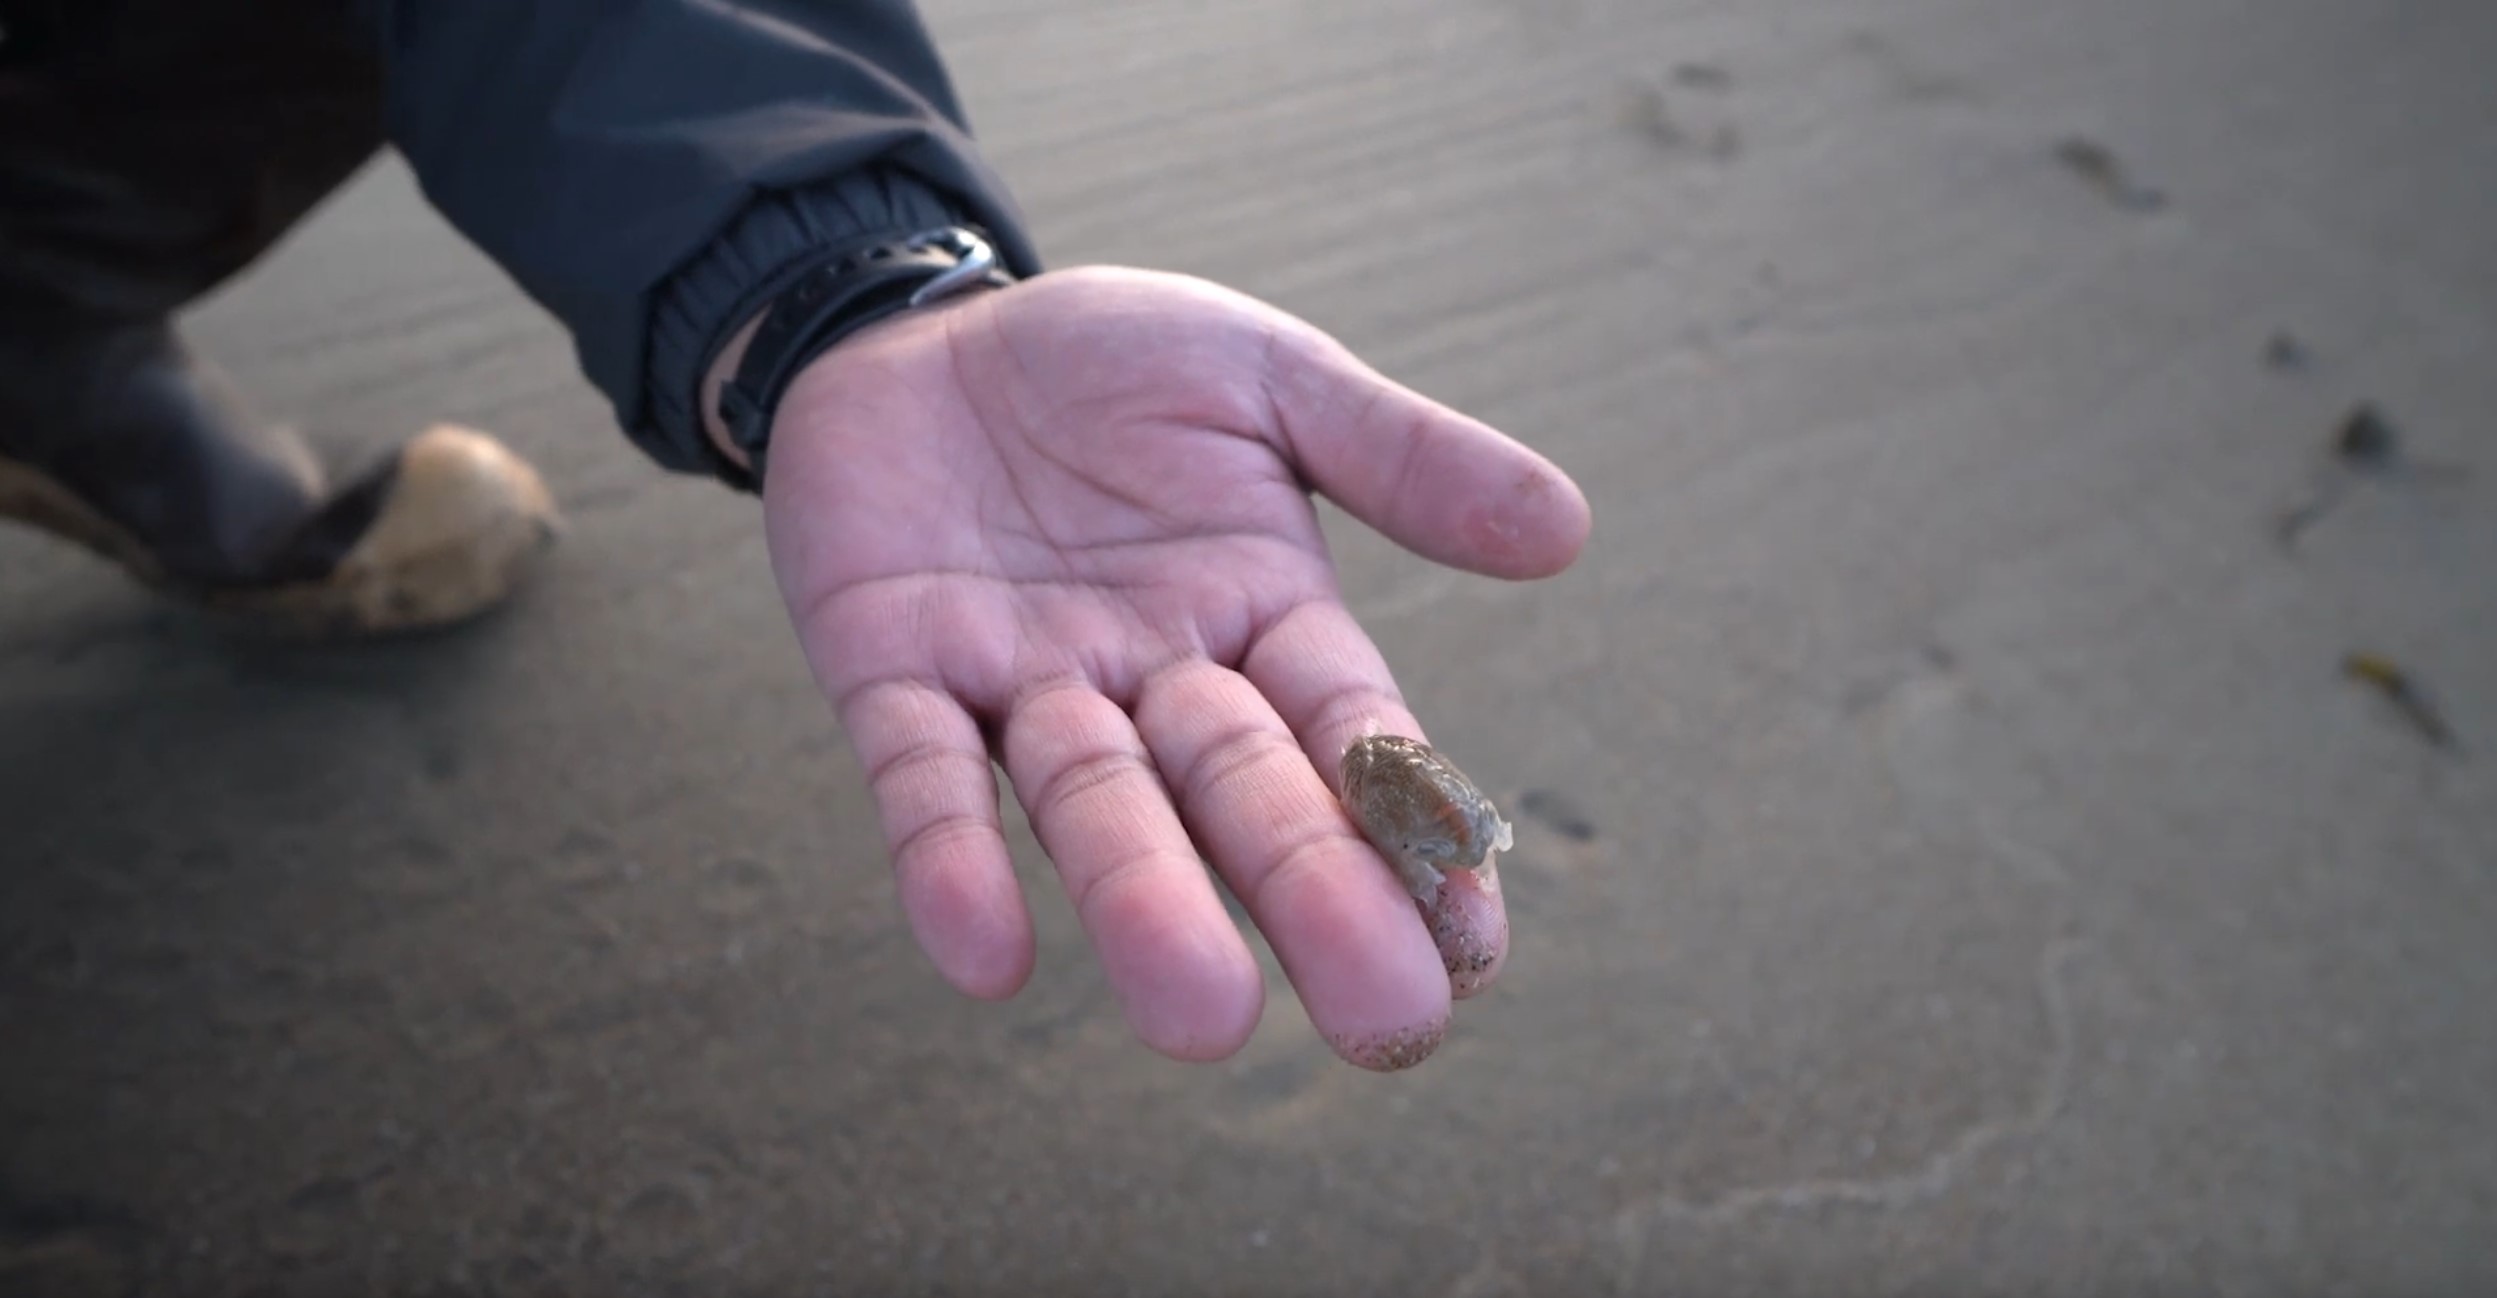 A tiny obaque mole crab about the size of a penny is held in a person's hand at the beach. 